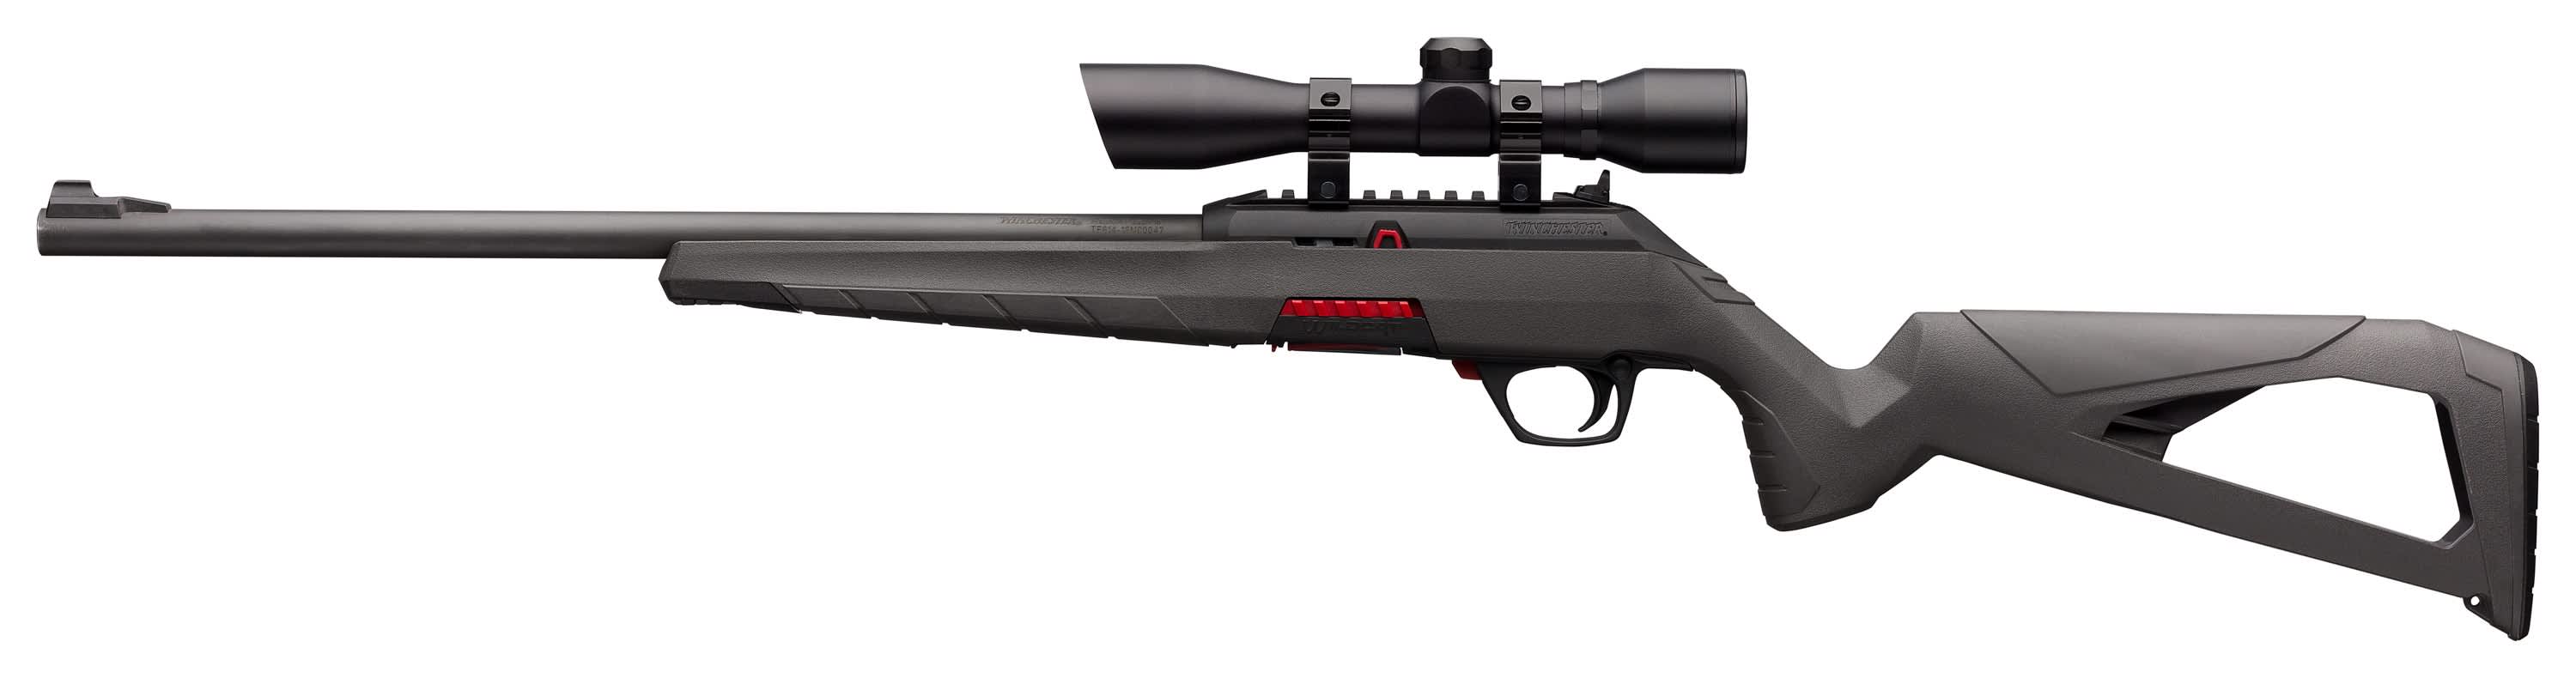 Winchester® Wildcat Semi-Automatic Rifle with Scope & Case